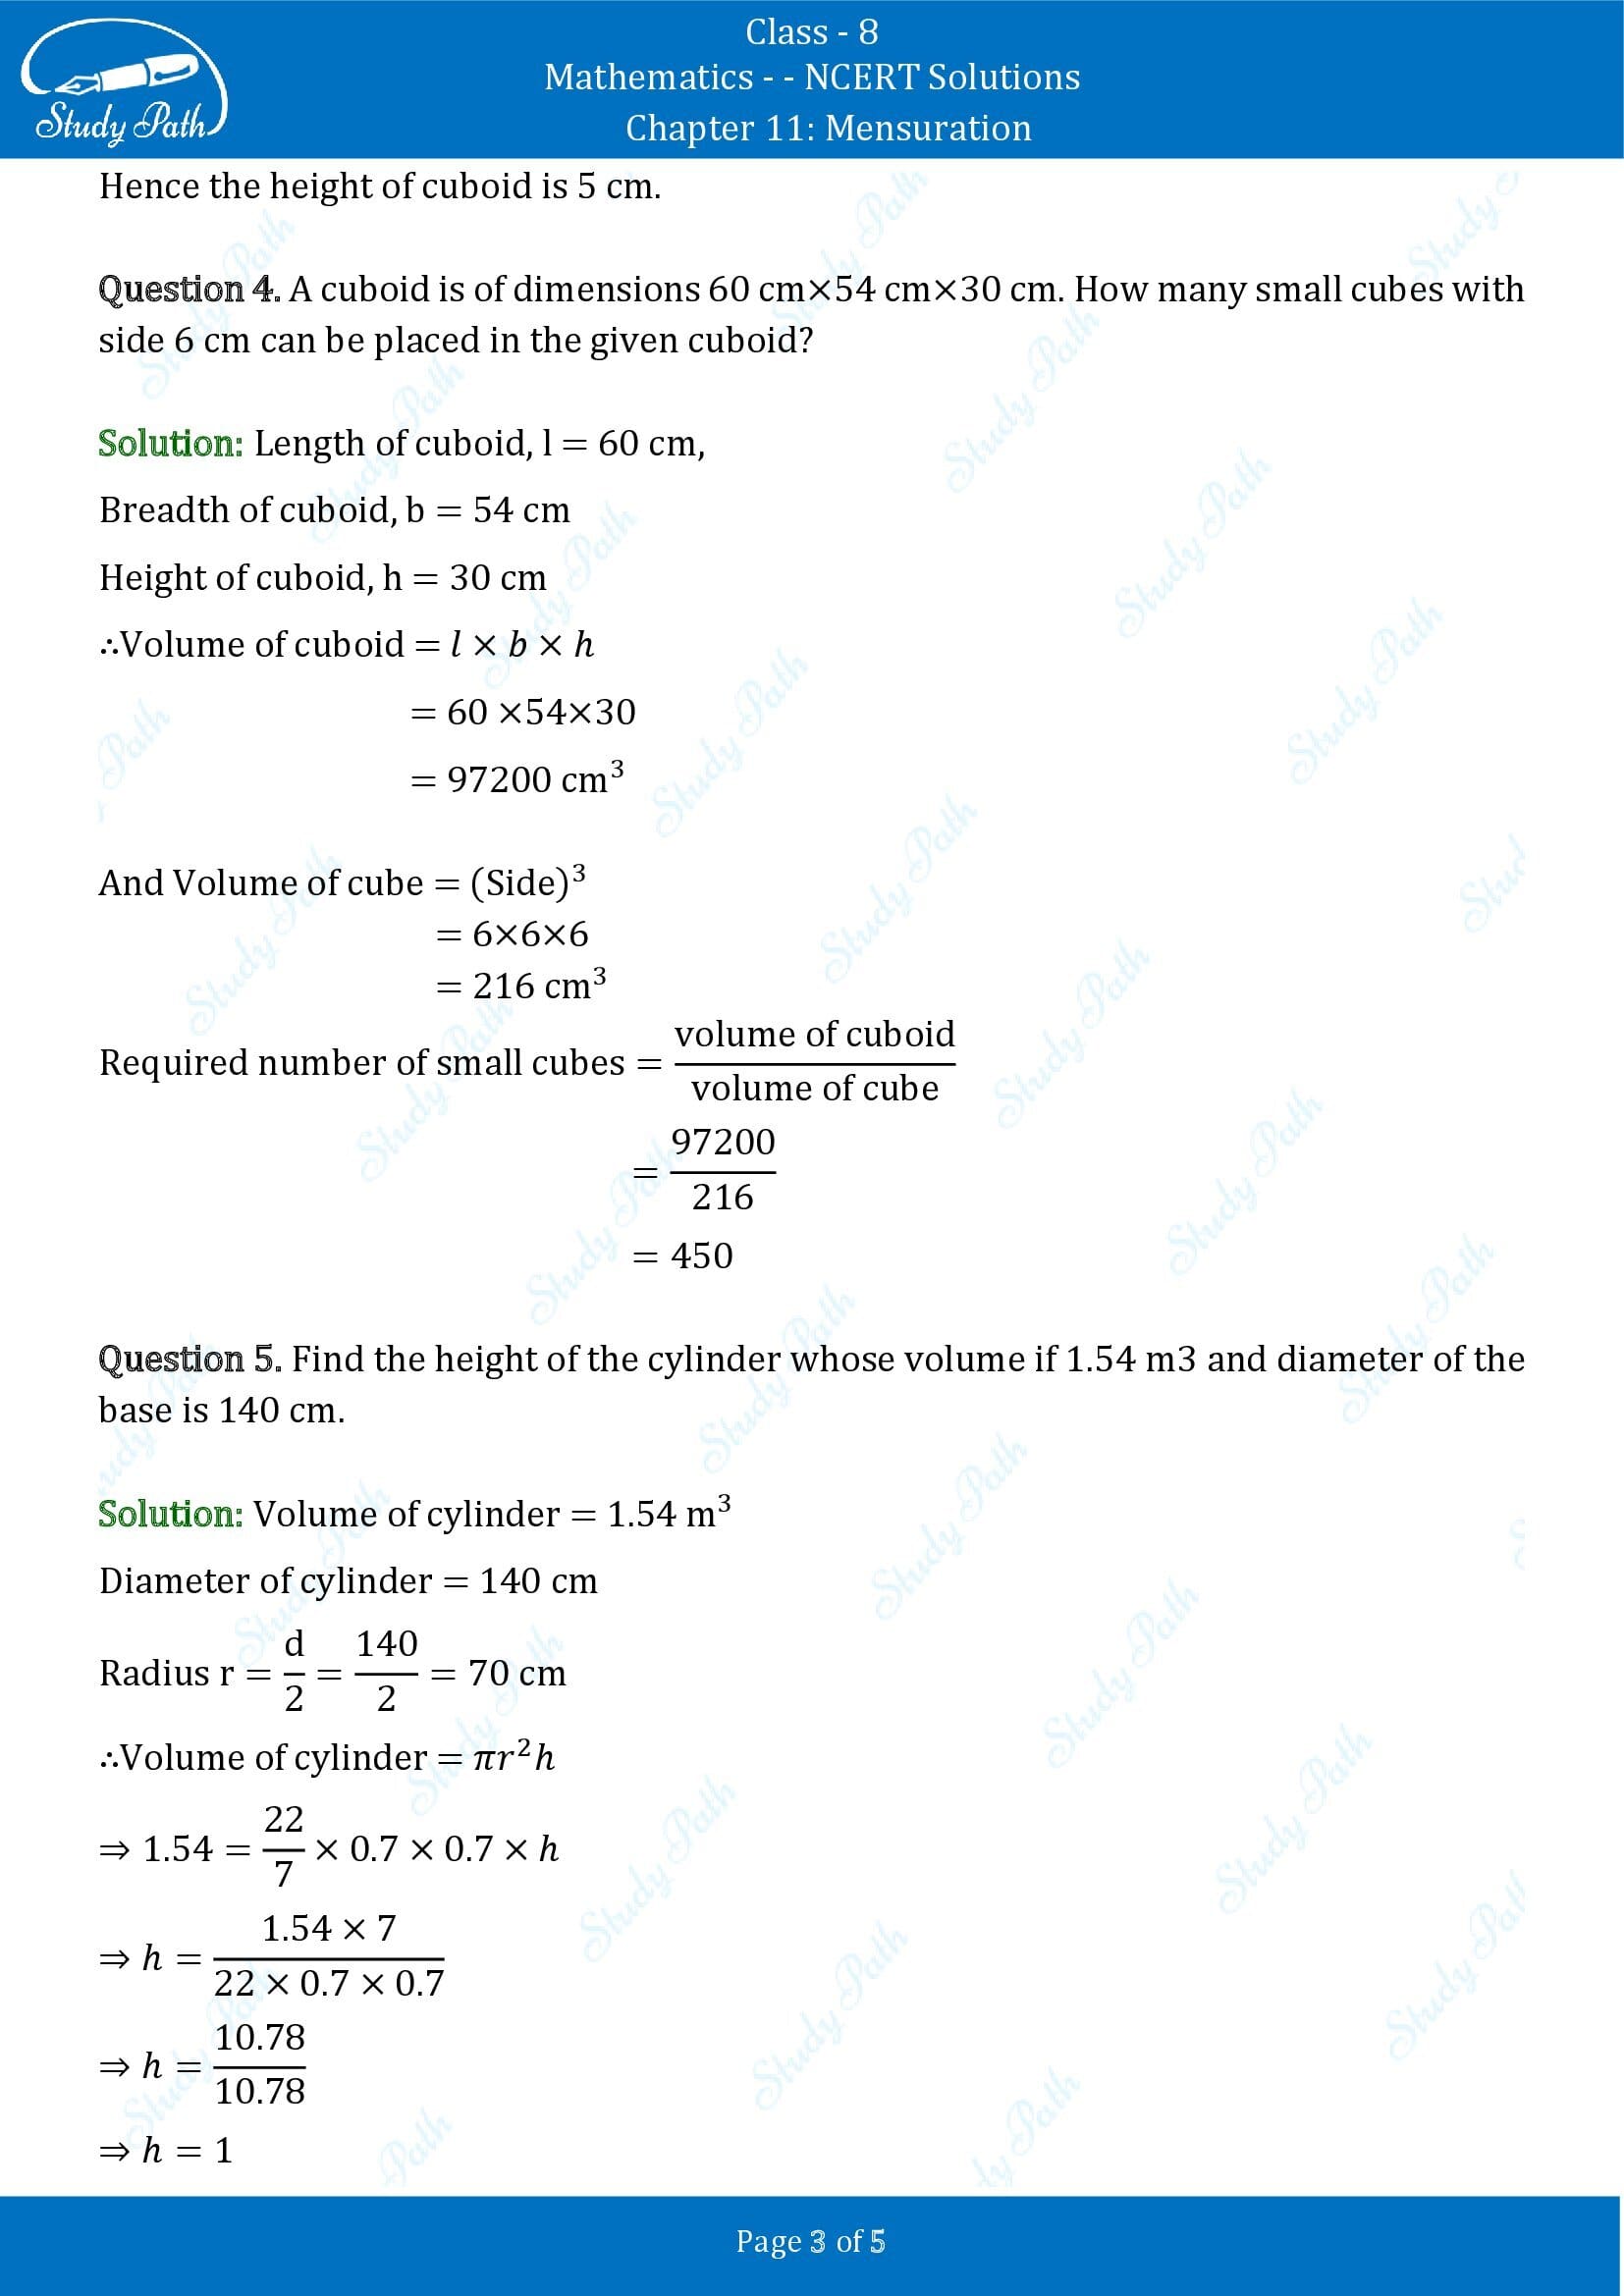 NCERT Solutions for Class 8 Maths Chapter 11 Mensuration Exercise 11.4 00003